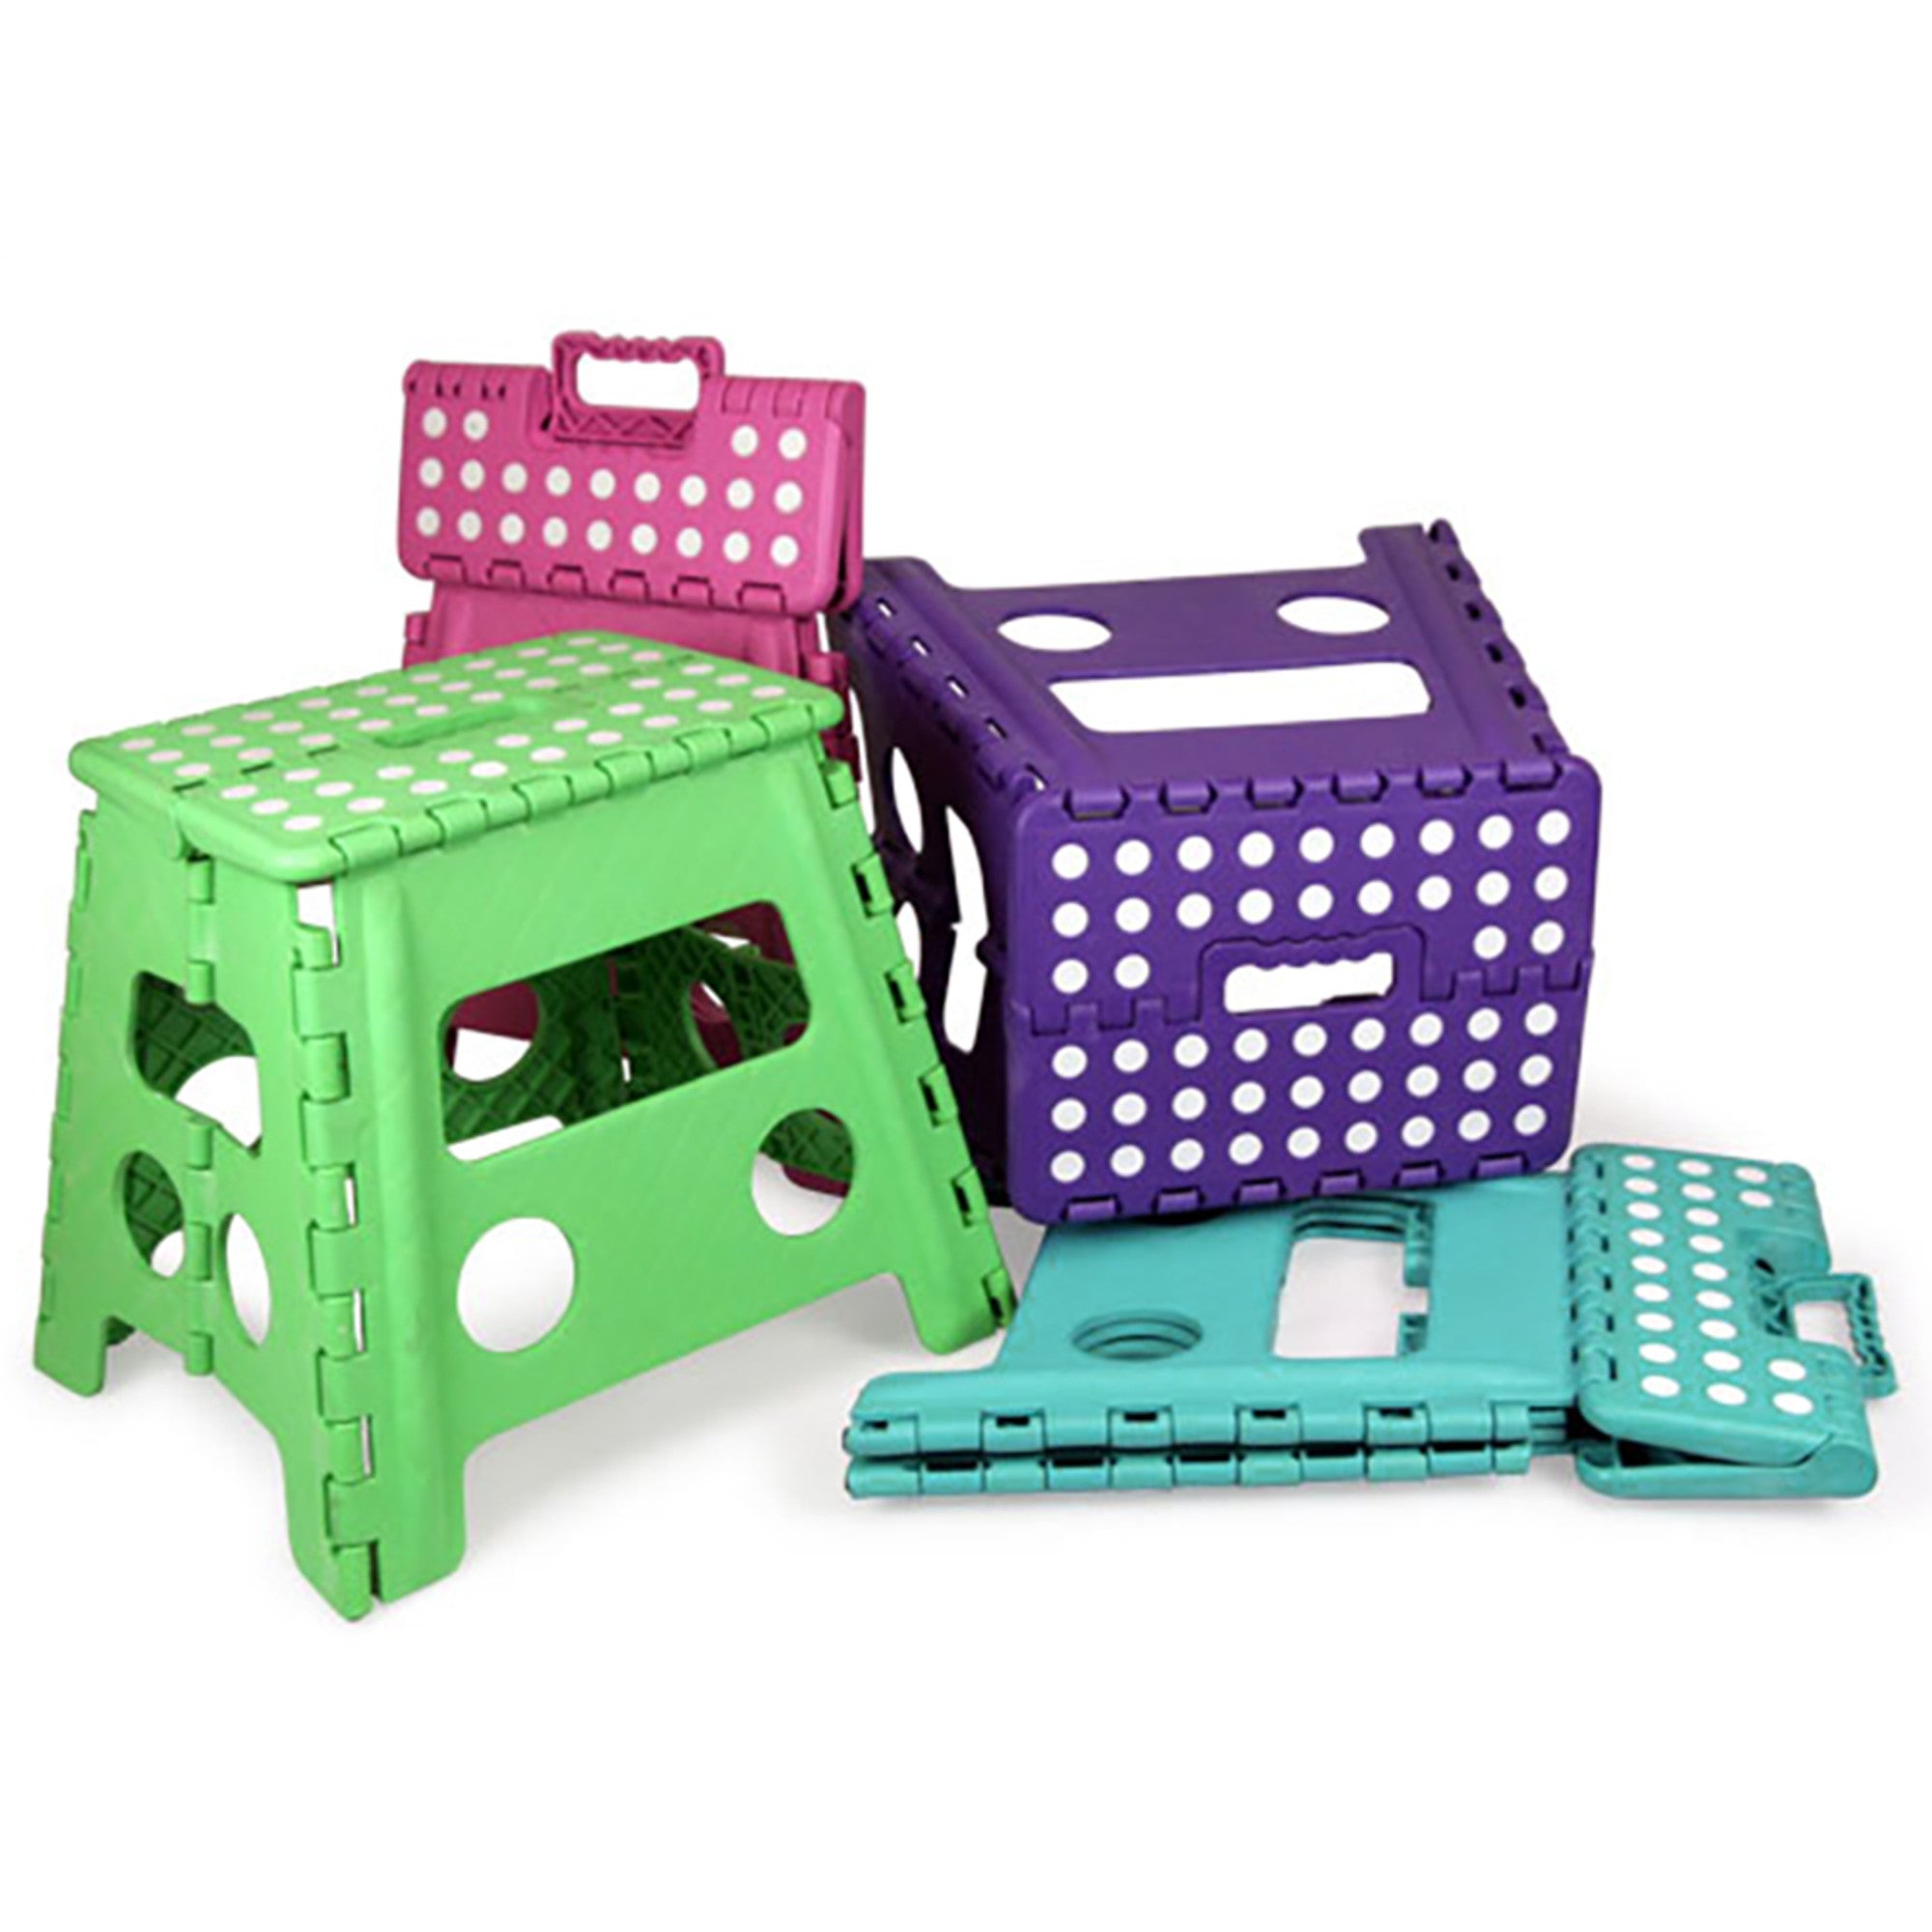 Home Basics Large Plastic Folding Stool with Non-Slip Dots - Assorted Colors